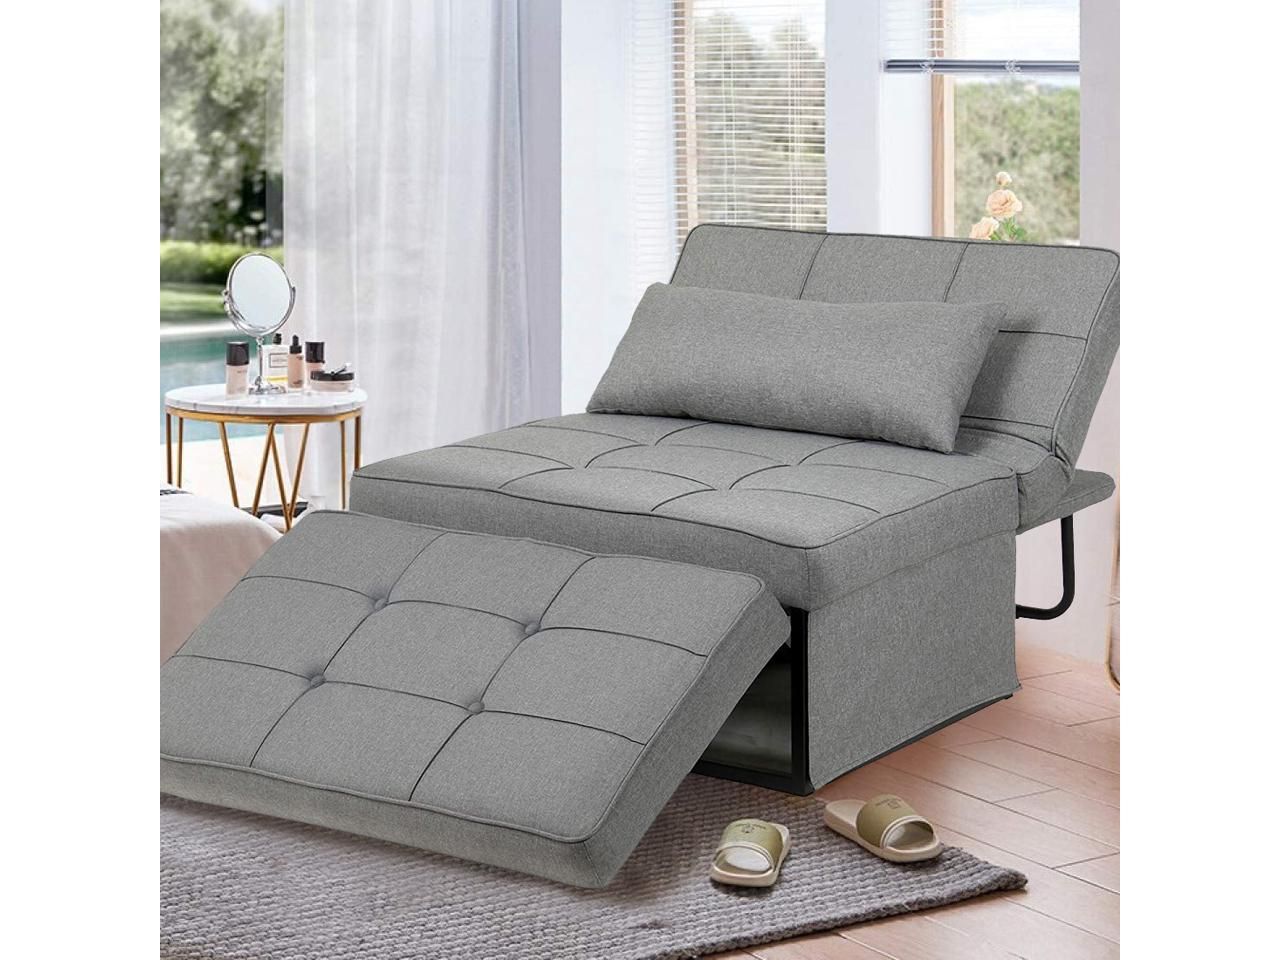 Googic Sofa Bed, Convertible Chair 4 In 1 Multi Function Folding Regarding Light Gray Fold Out Sleeper Ottomans (View 7 of 20)